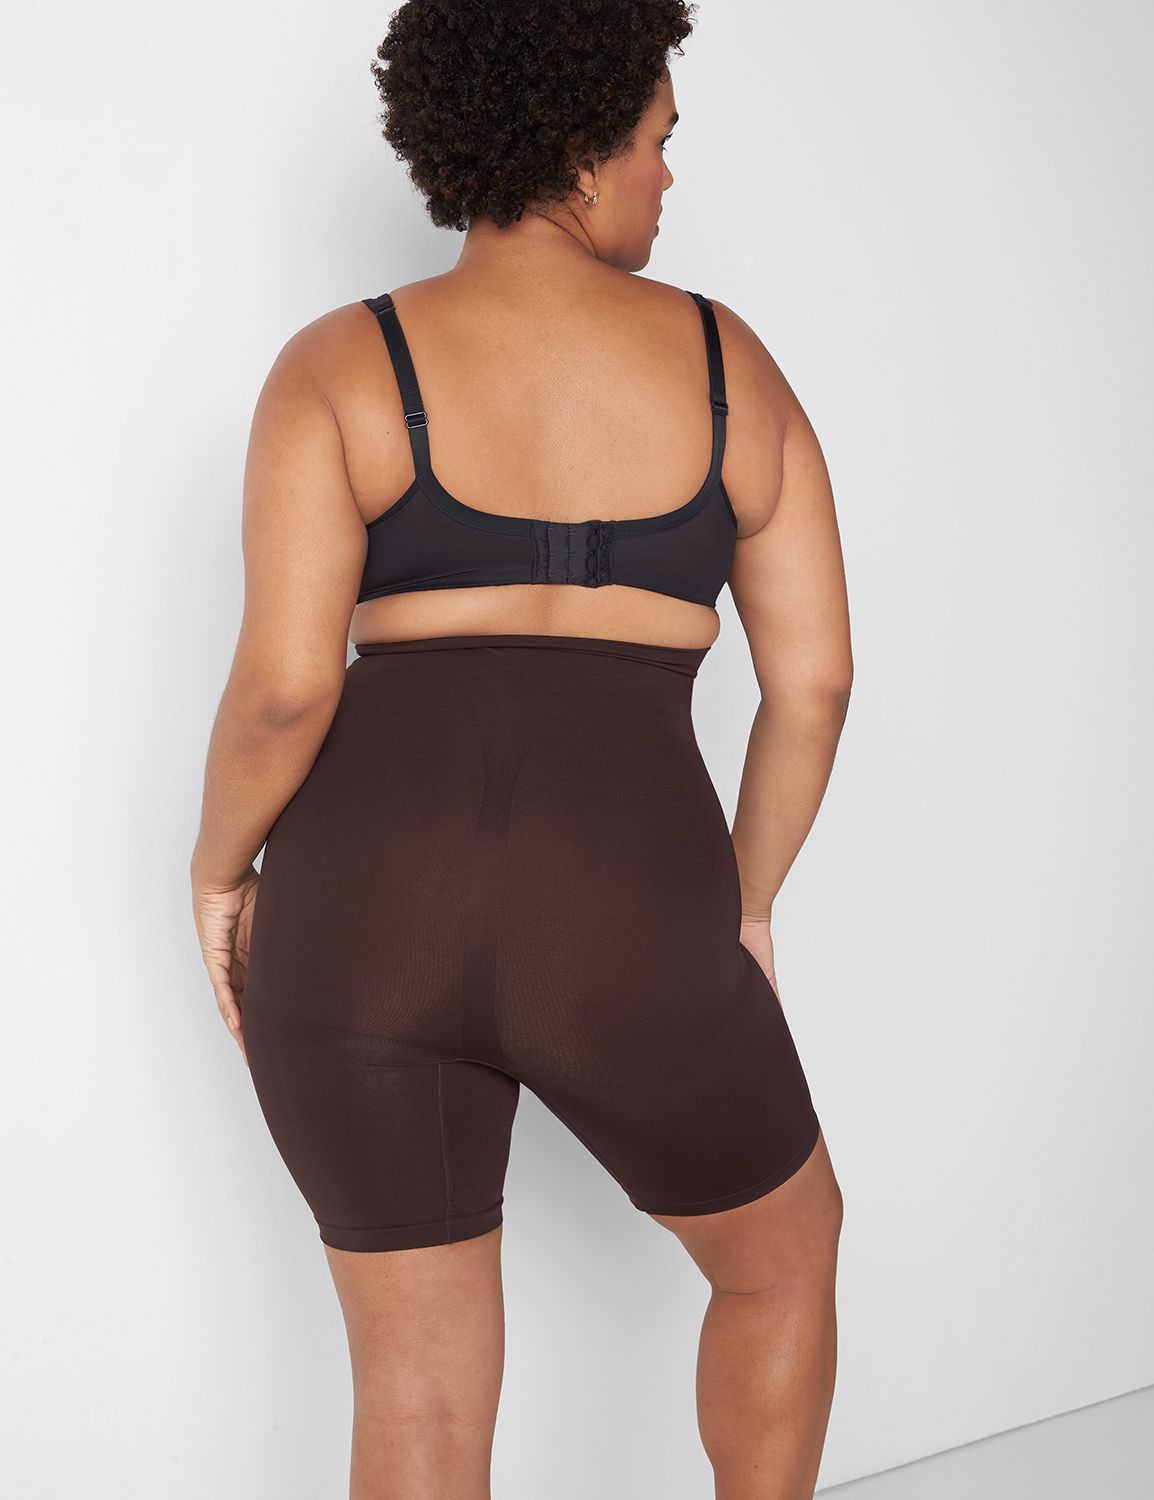 Cacique / Lane Bryant Plus Size Shaping Ultra High-Waist Short